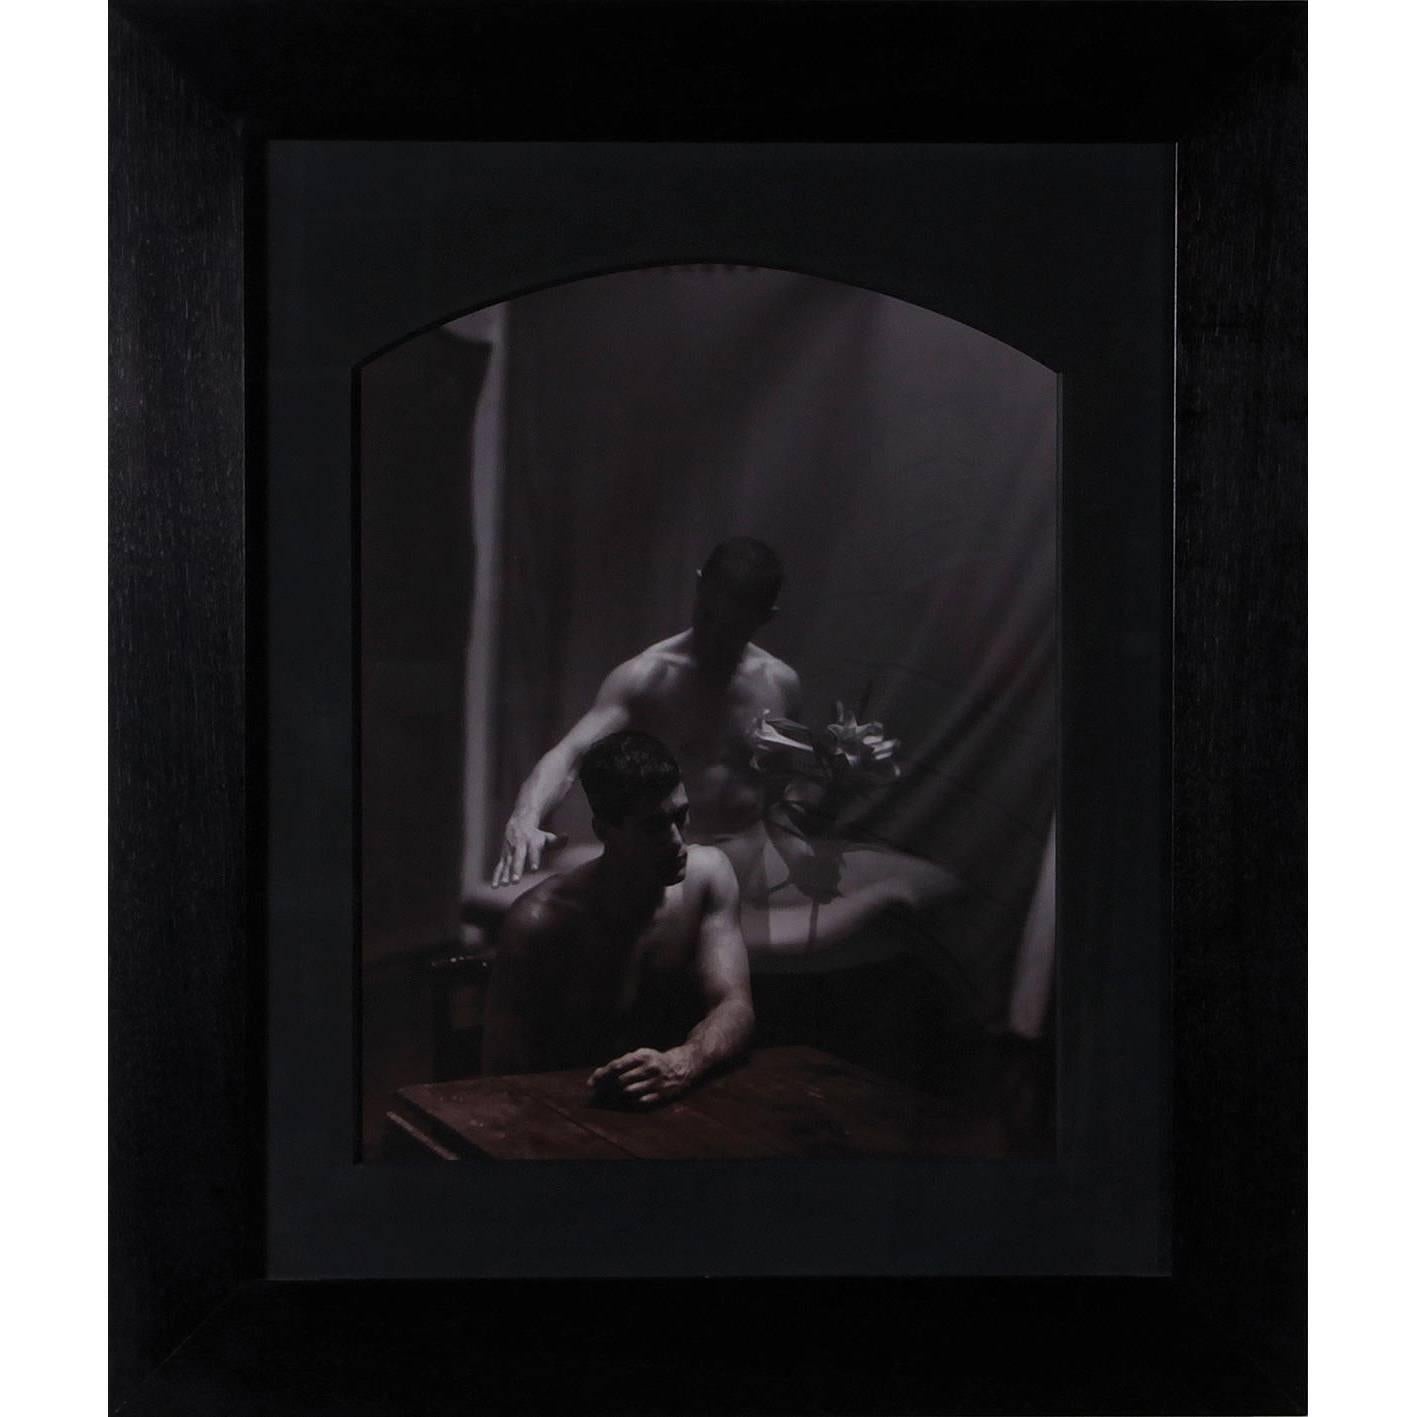 Framed Editioned Photograph by John Patrick Dugdale